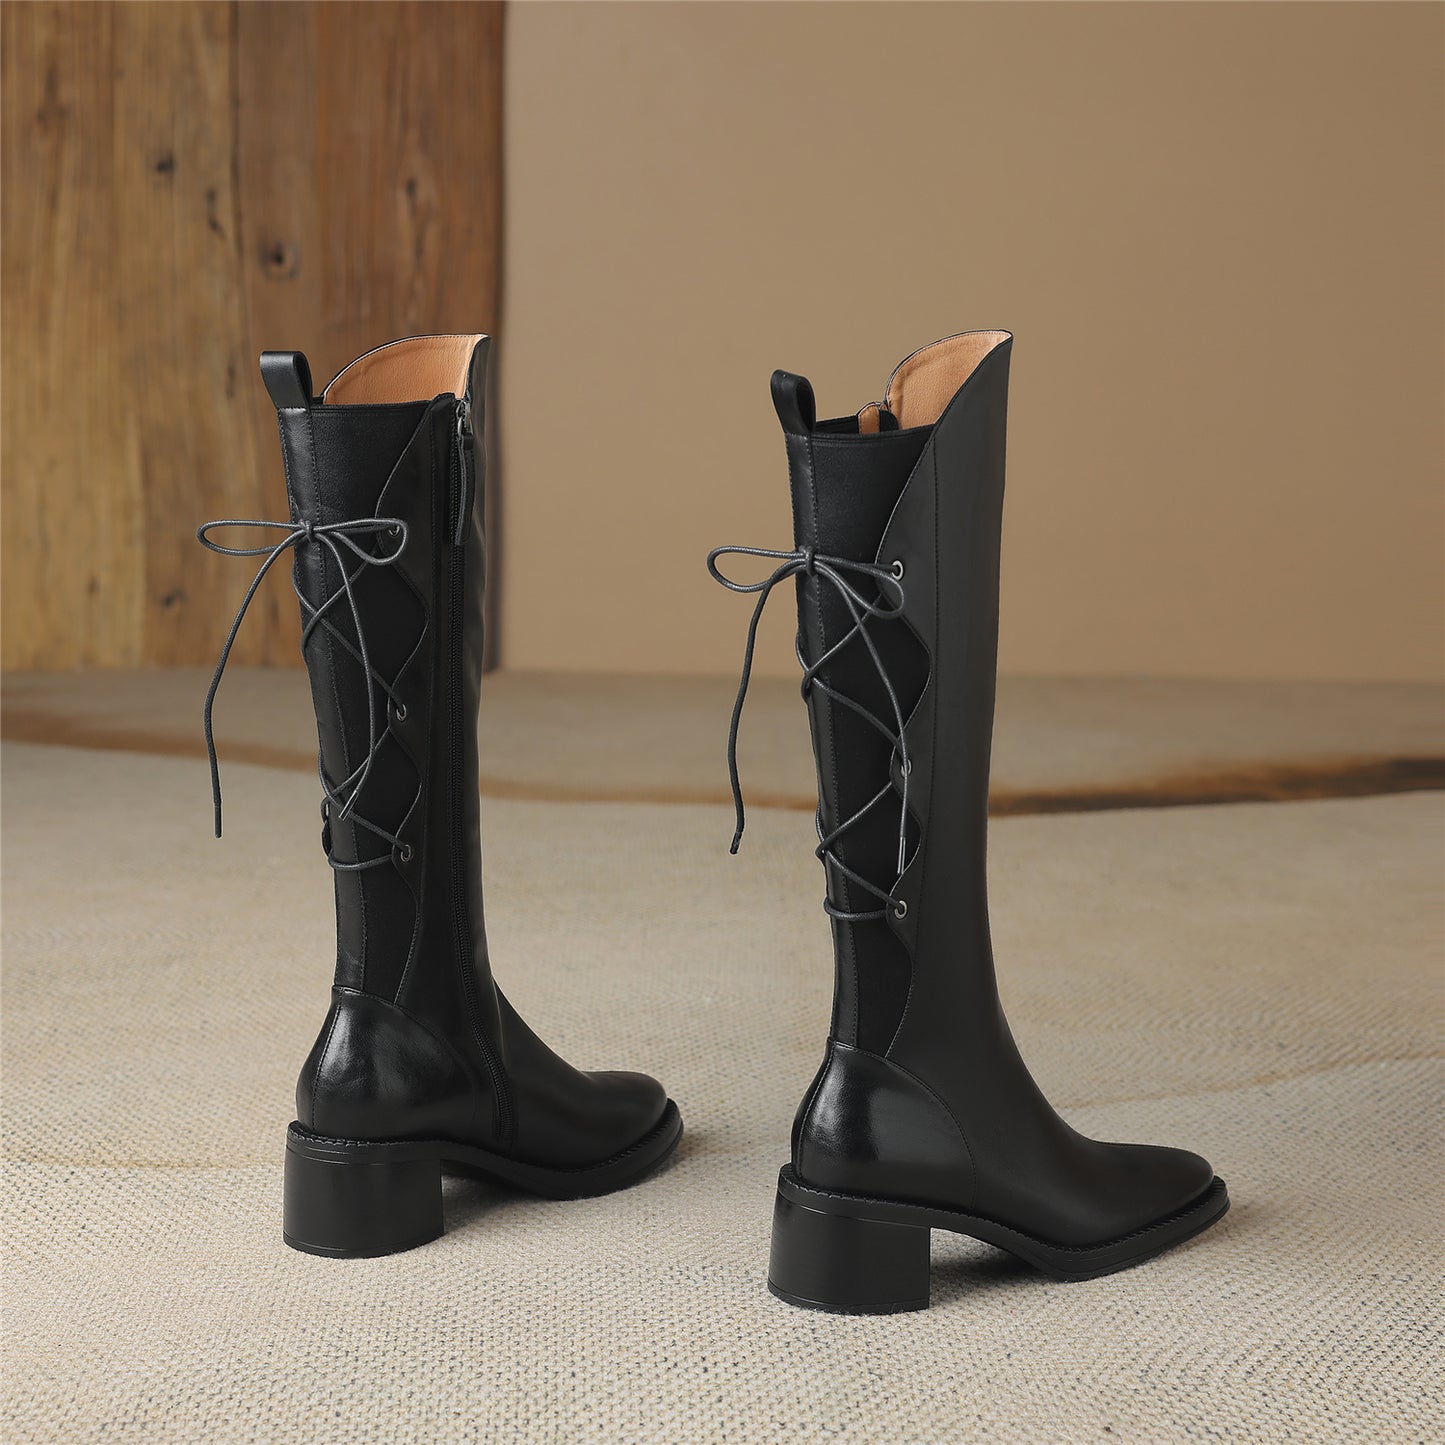 TinaCus Genuine Leather Women's Band Design Pointed Toe Handmade Chunky Heel Zip Up Knee High Boots